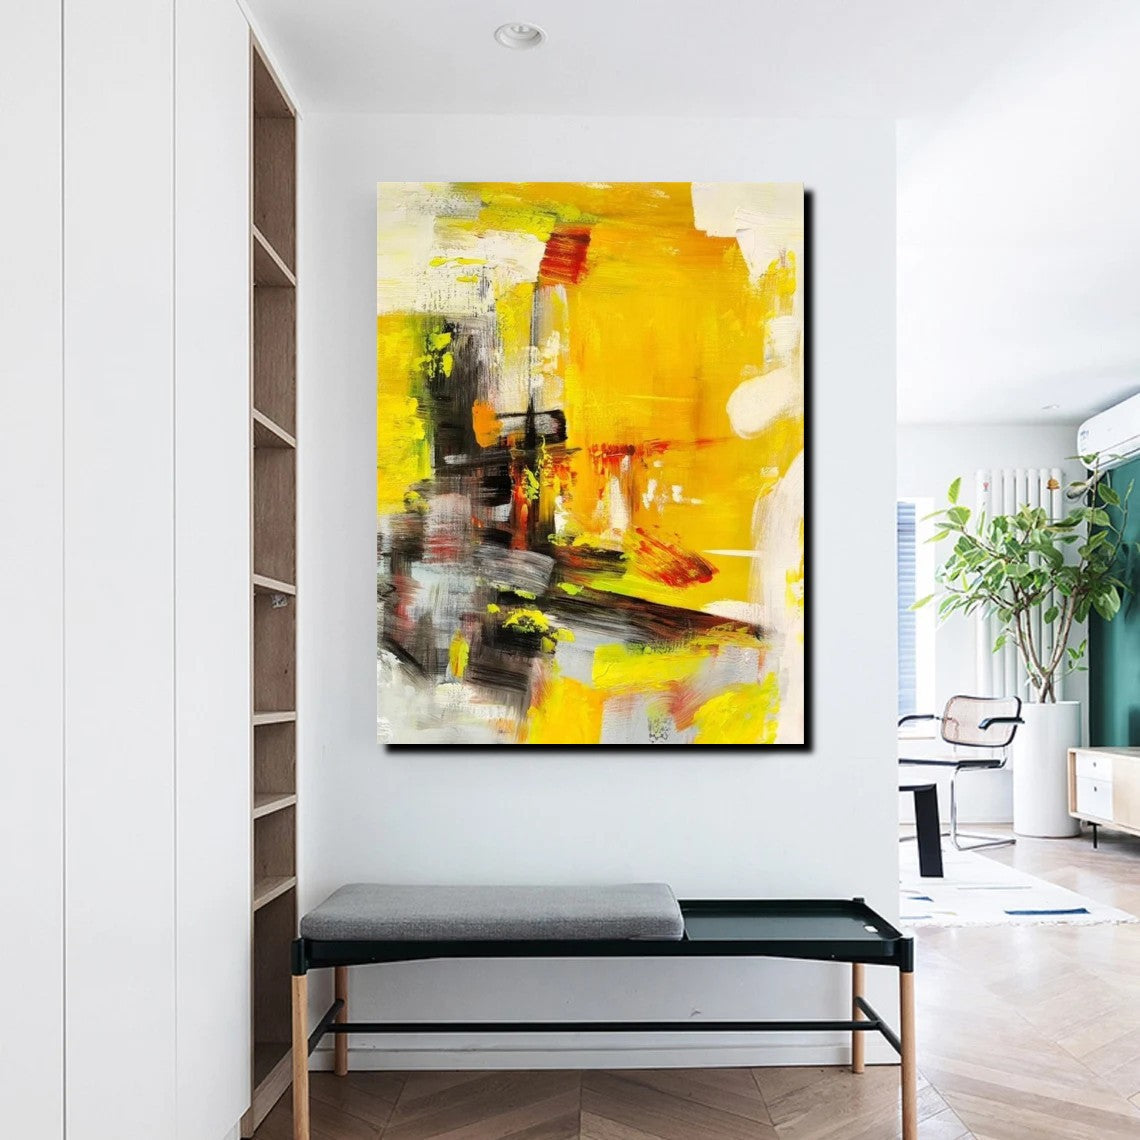 Large Canvas Paintings Behind Sofa, Acrylic Painting for Living Room, Yellow Contemporary Modern Art, Buy Large Paintings Online-Silvia Home Craft